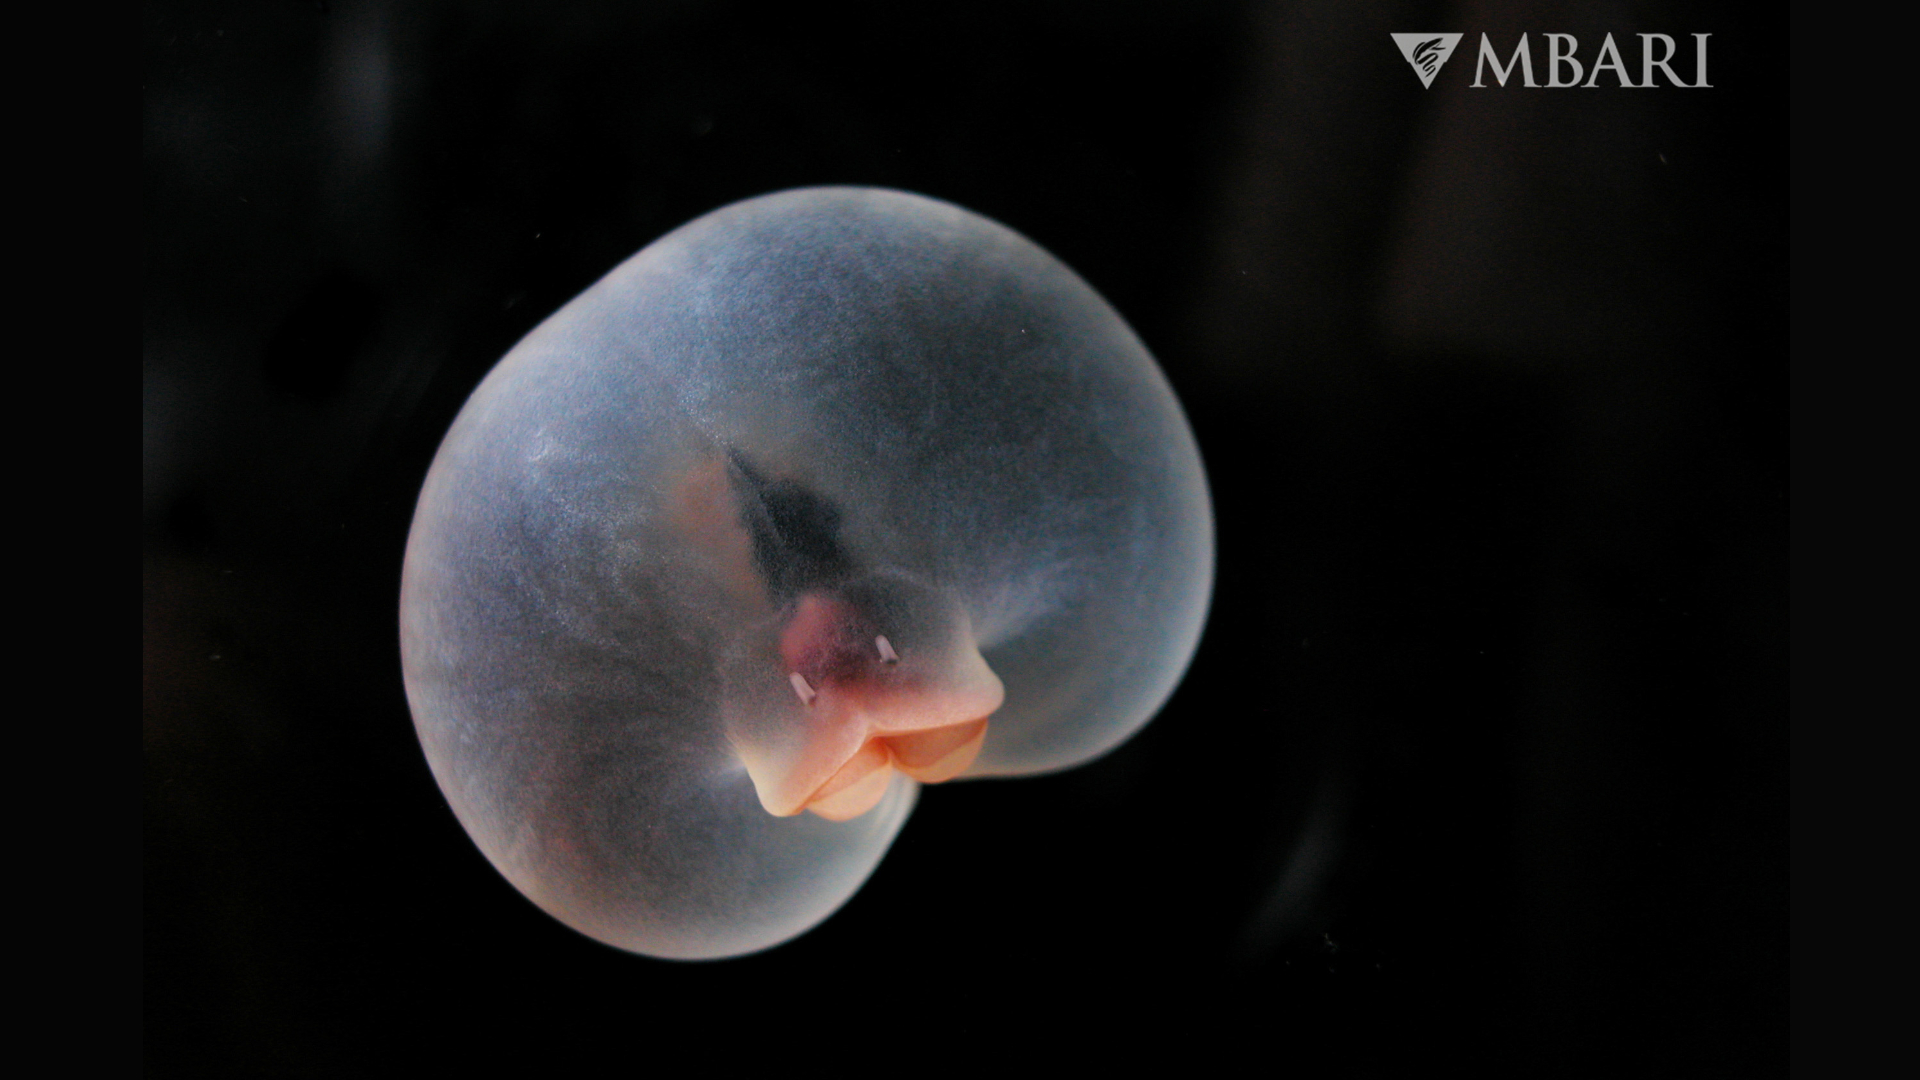 Pigbutt worm: The deep-sea 'mystery blob' with the rump of a pig and a ballooned belly